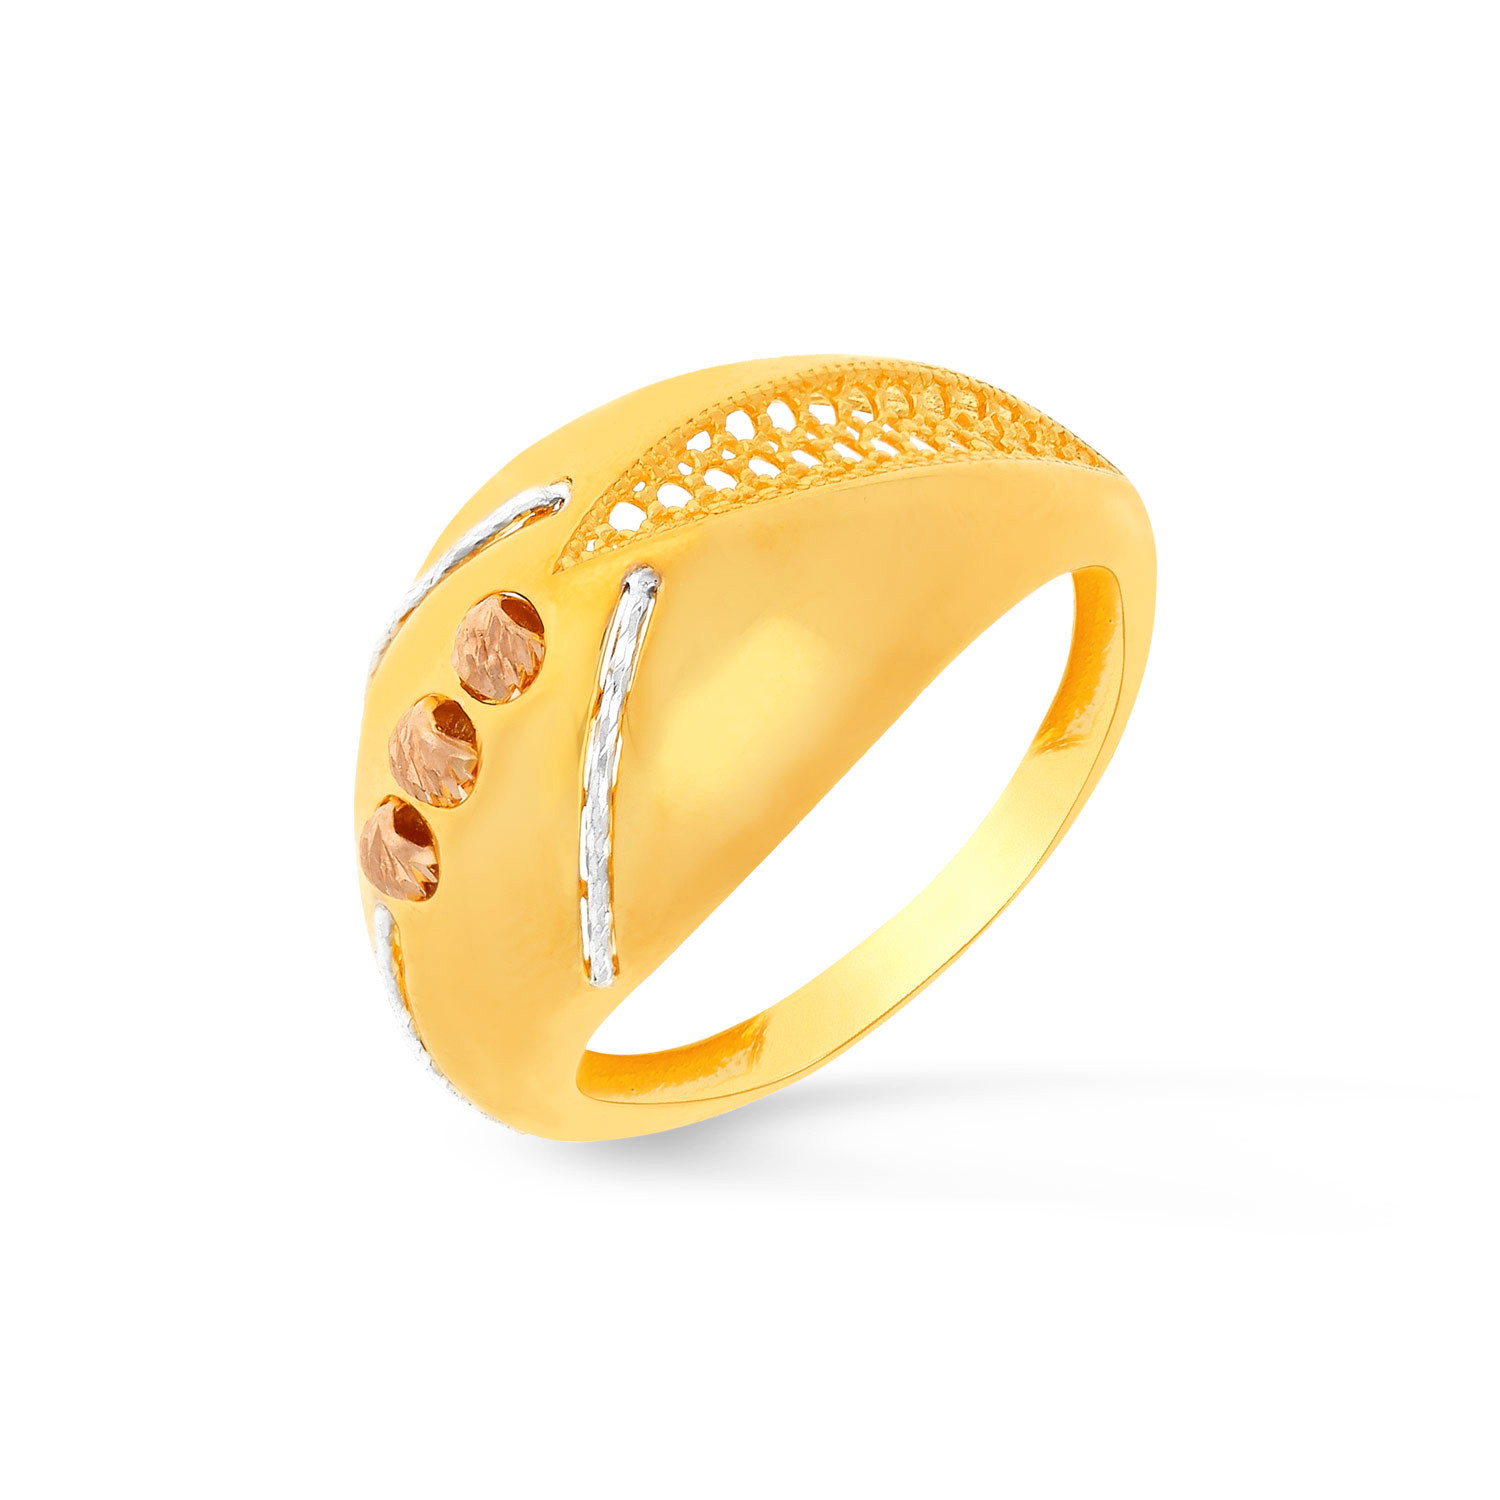 Buy MALABAR GOLD AND DIAMONDS Womens Gold Ring SKYFRDZ026 Size 14 |  Shoppers Stop